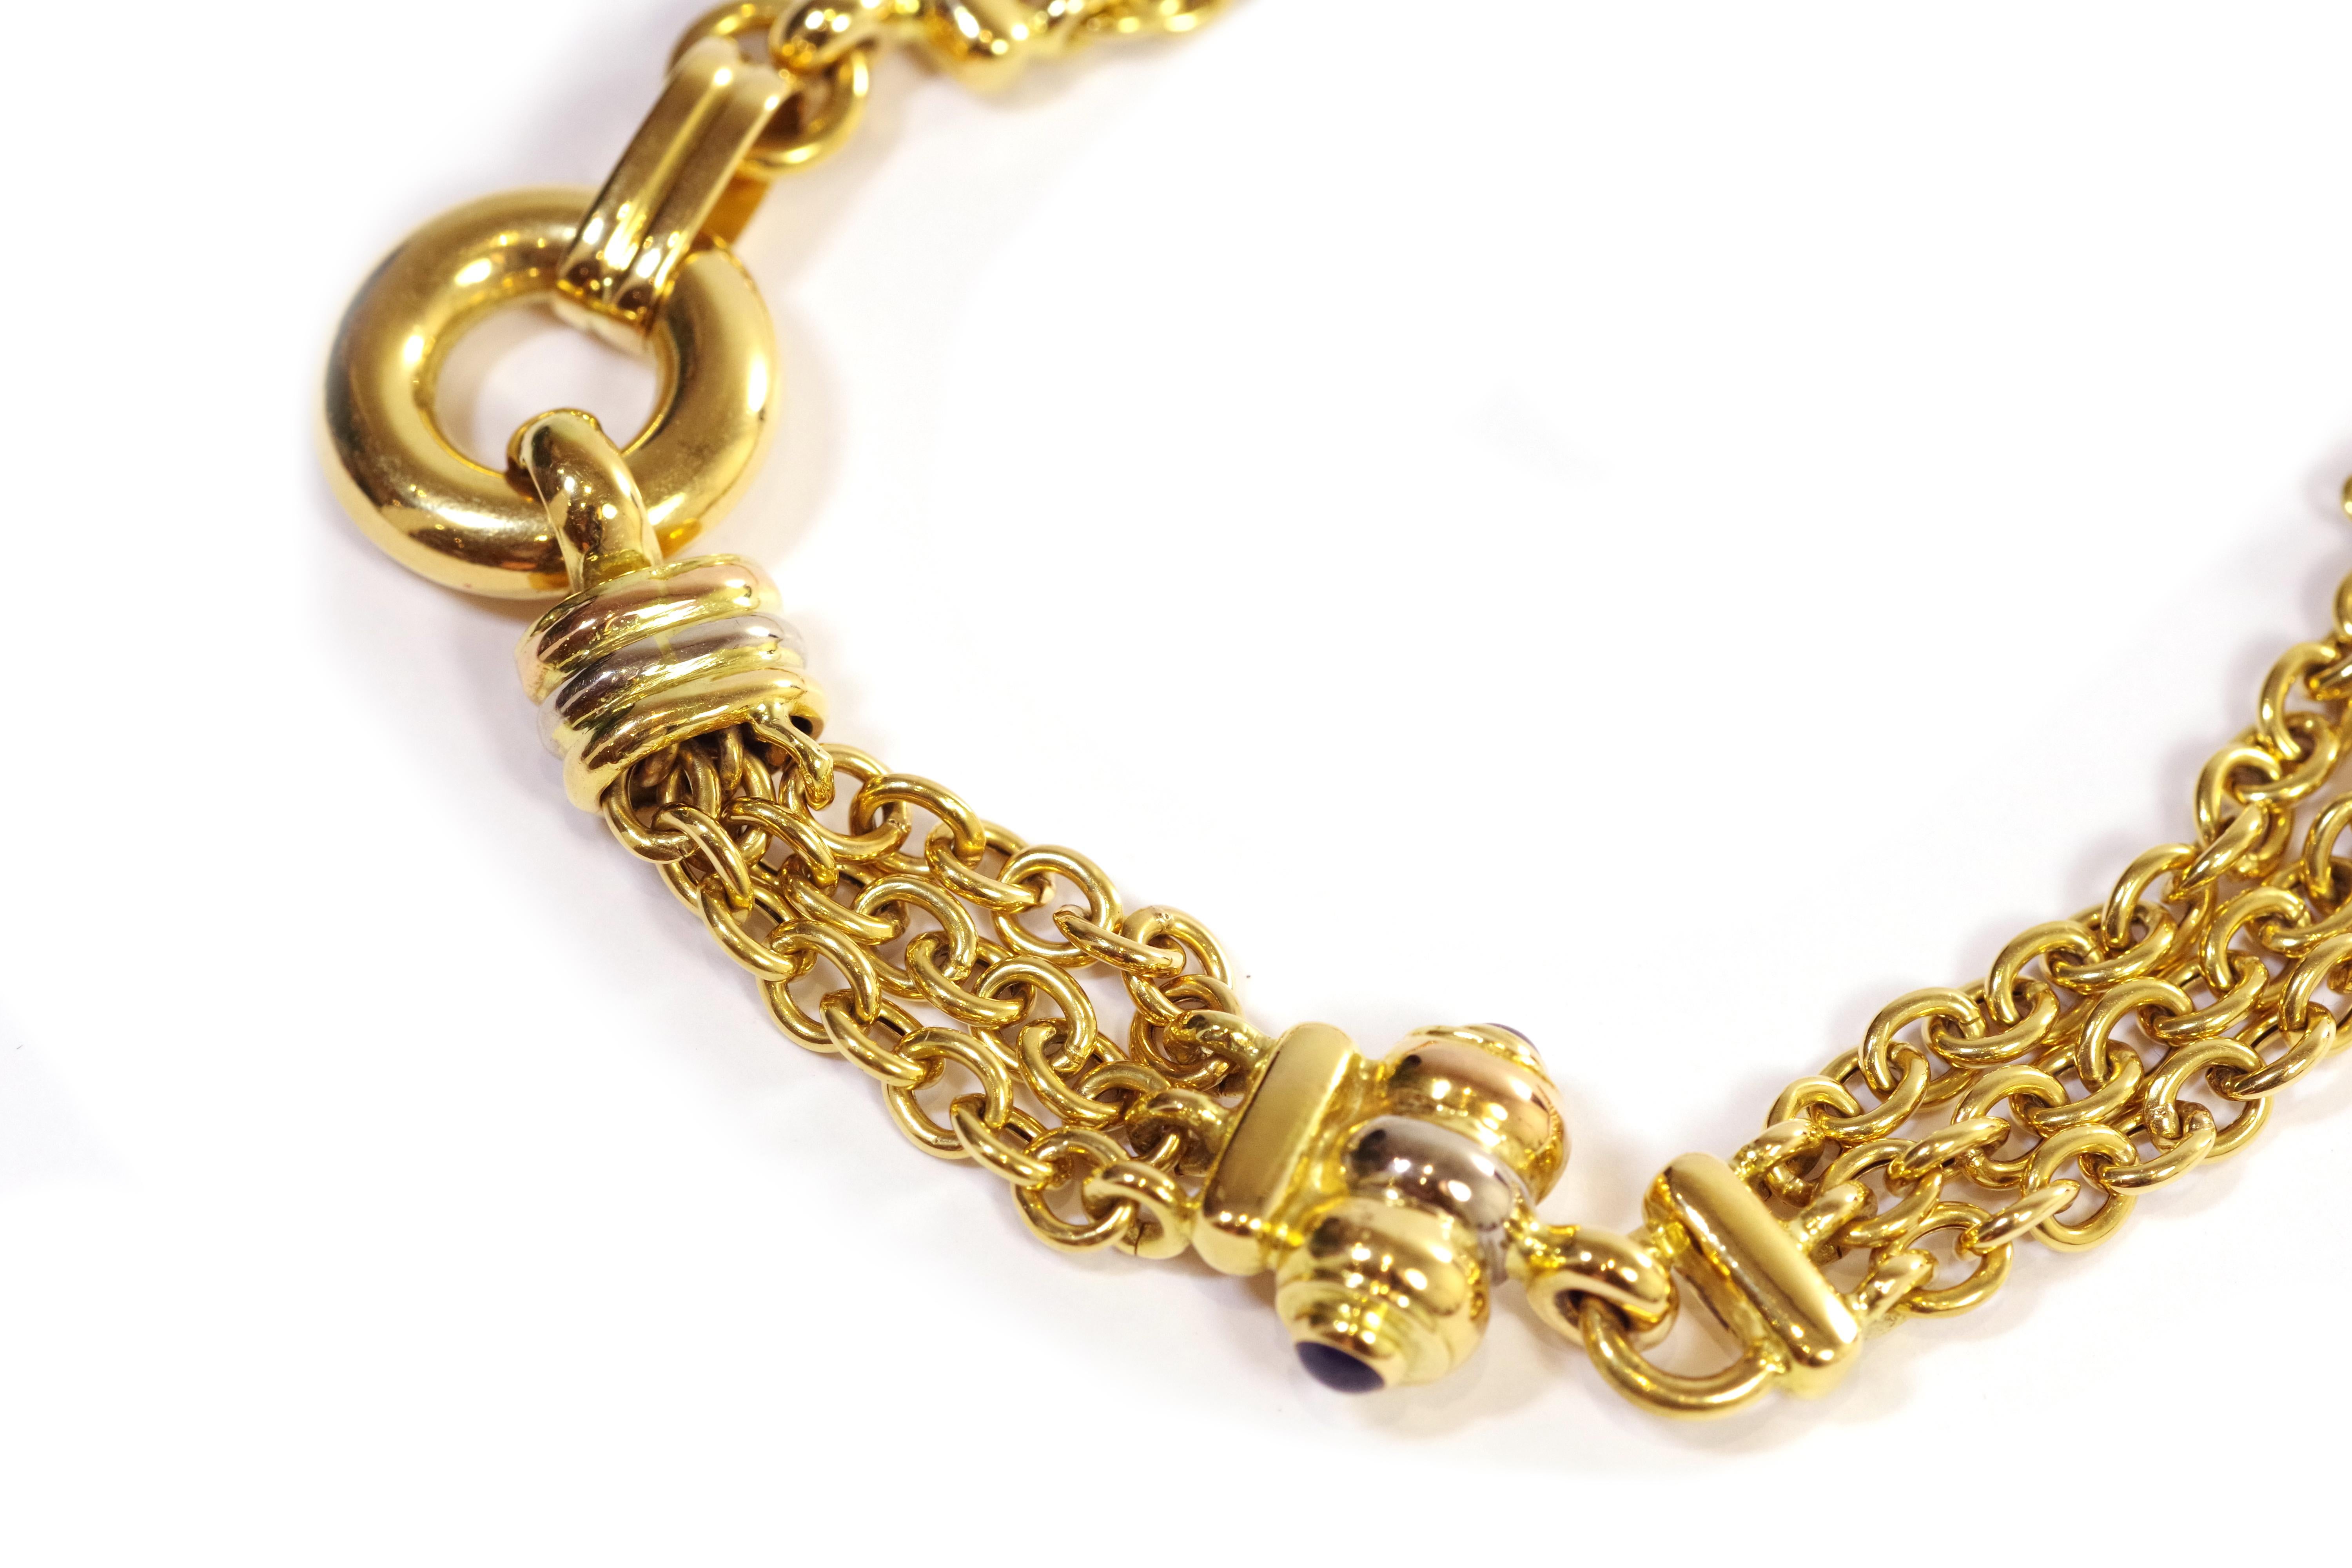 Vintage flexible bracelet in 18 karat yellow gold. The bracelet is composed of three rows of chains connected by tricolor gold elements. The piece is adorned with a setting of blue glass cabochons and a hollow gold ring. Created around 1990,